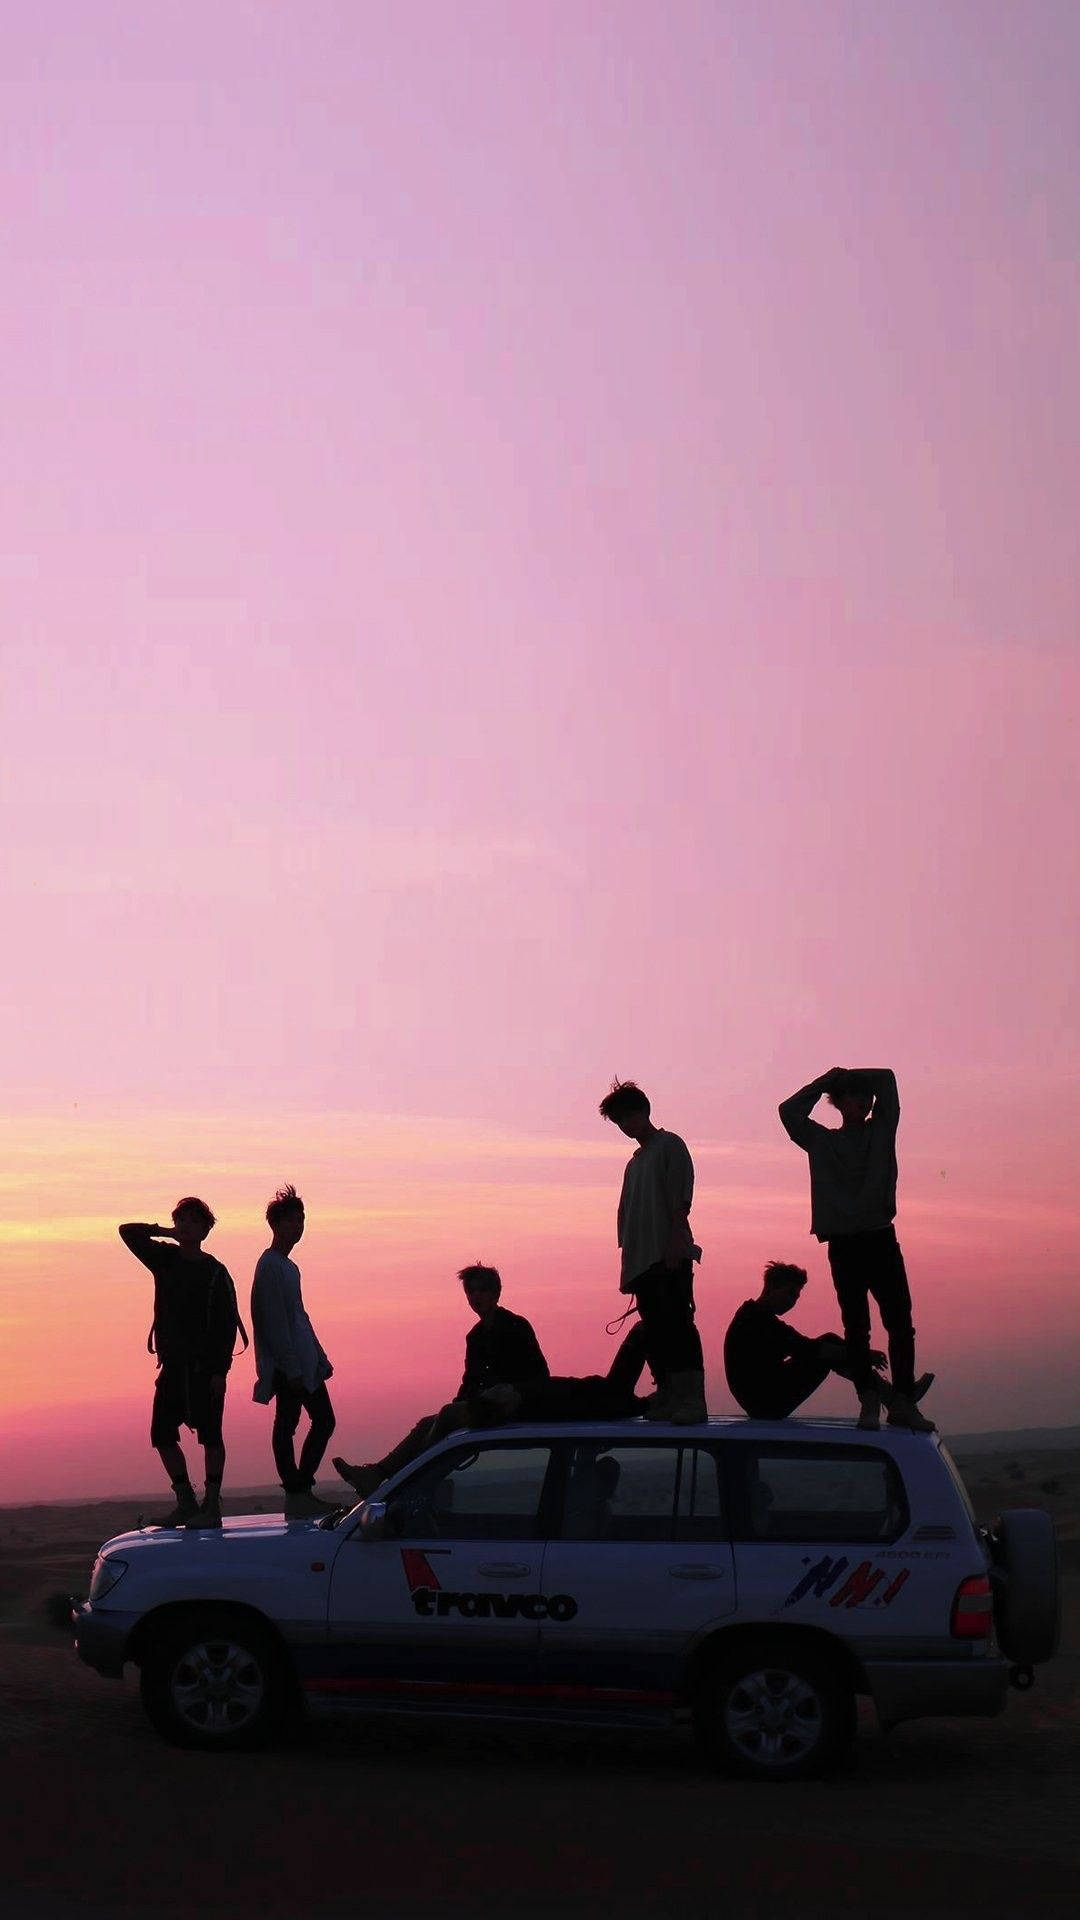 Bts Cute Aesthetic Silhouettes Background